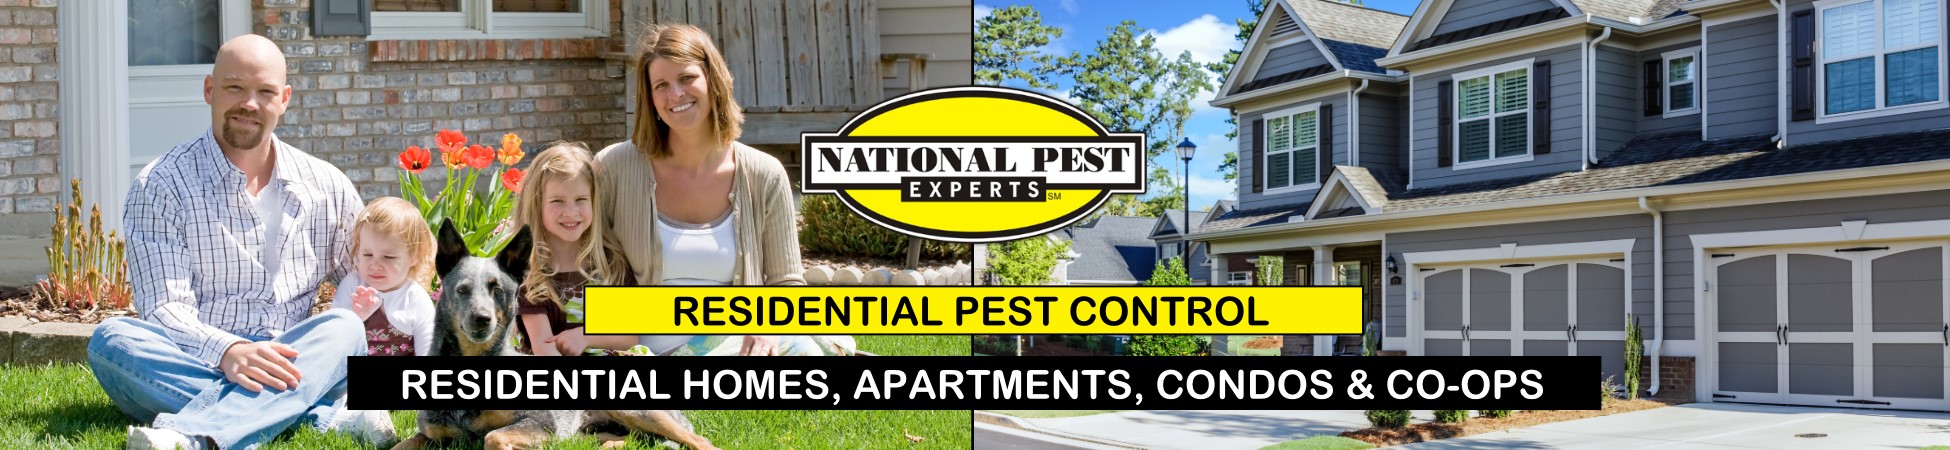 National Pest Experts - Residential exterminating and pest control in Bethpage, NY